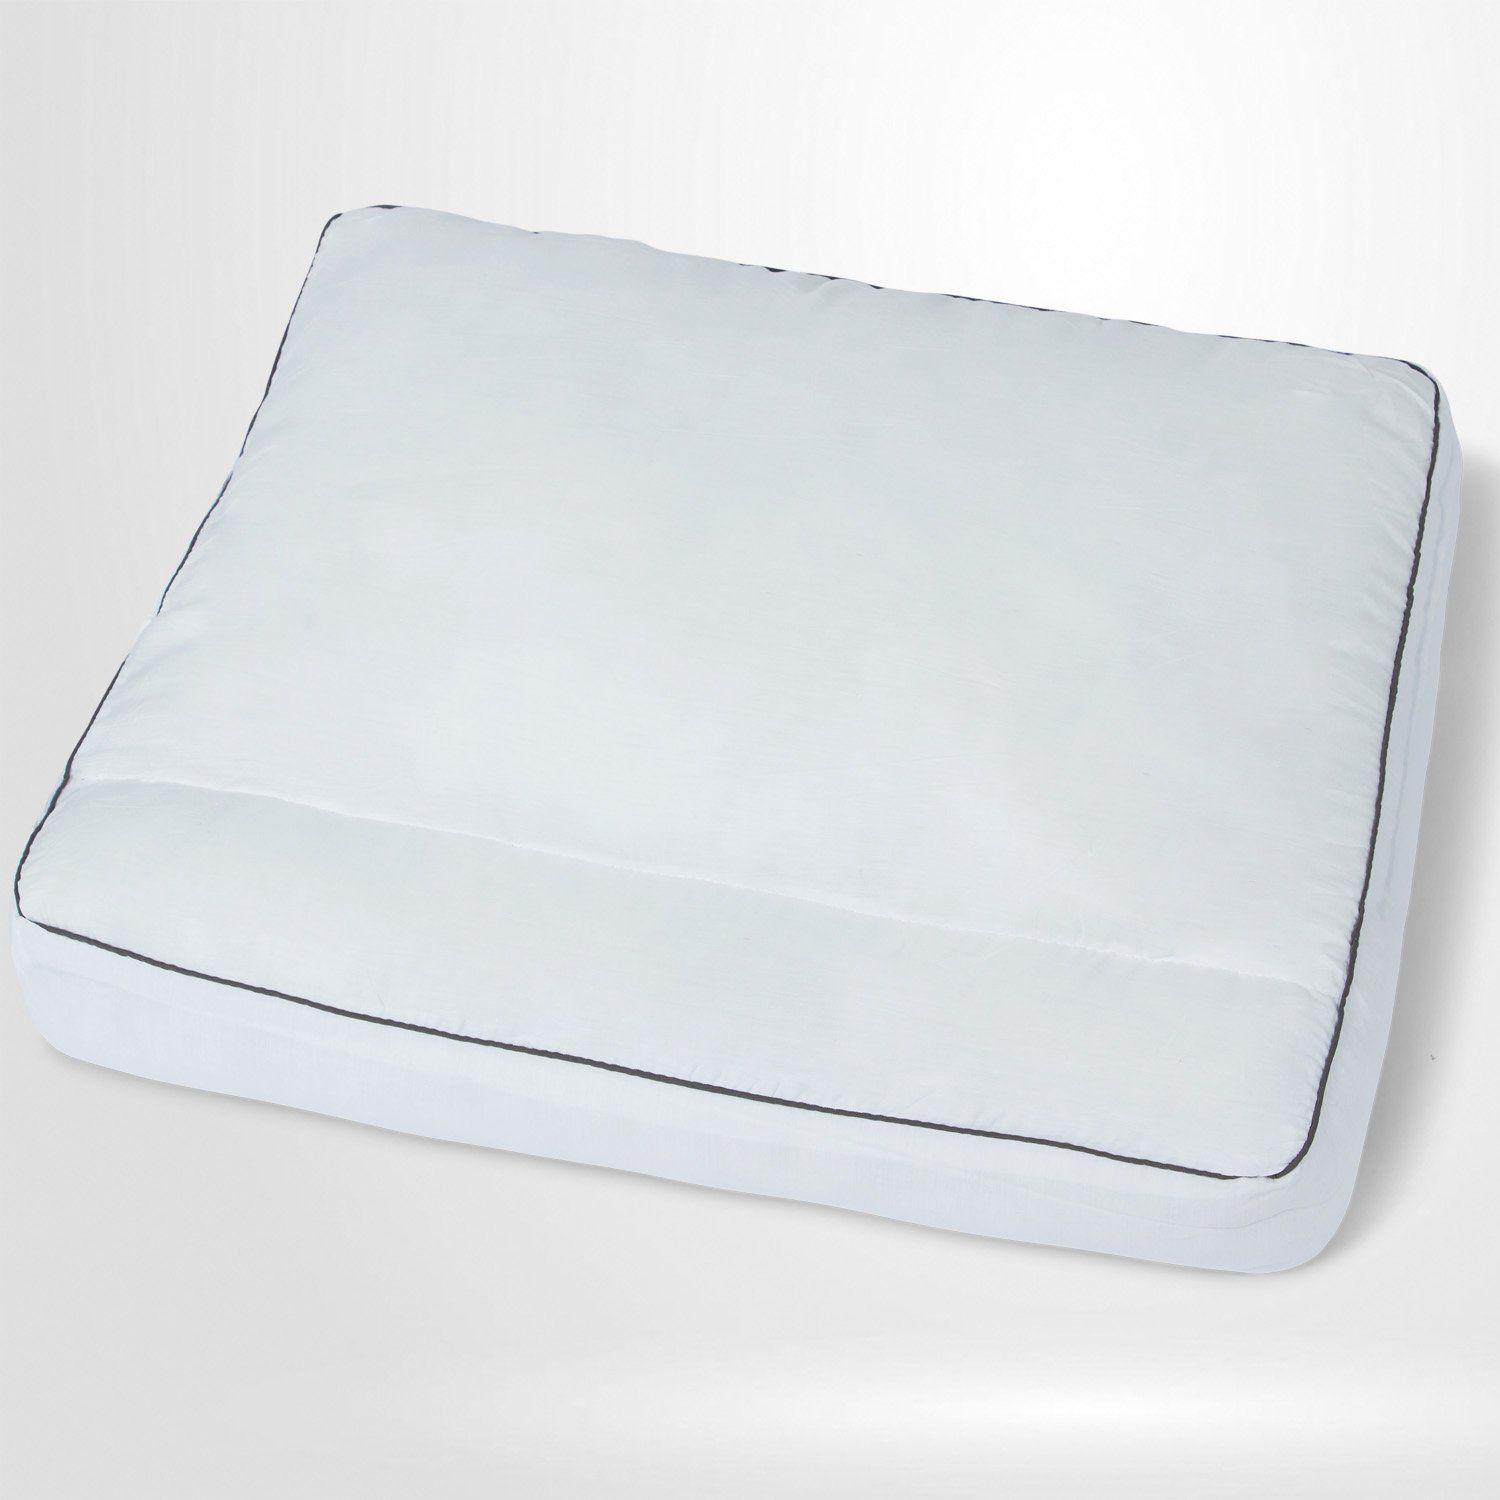 dunimed orthopaedic pillow with neck support top view